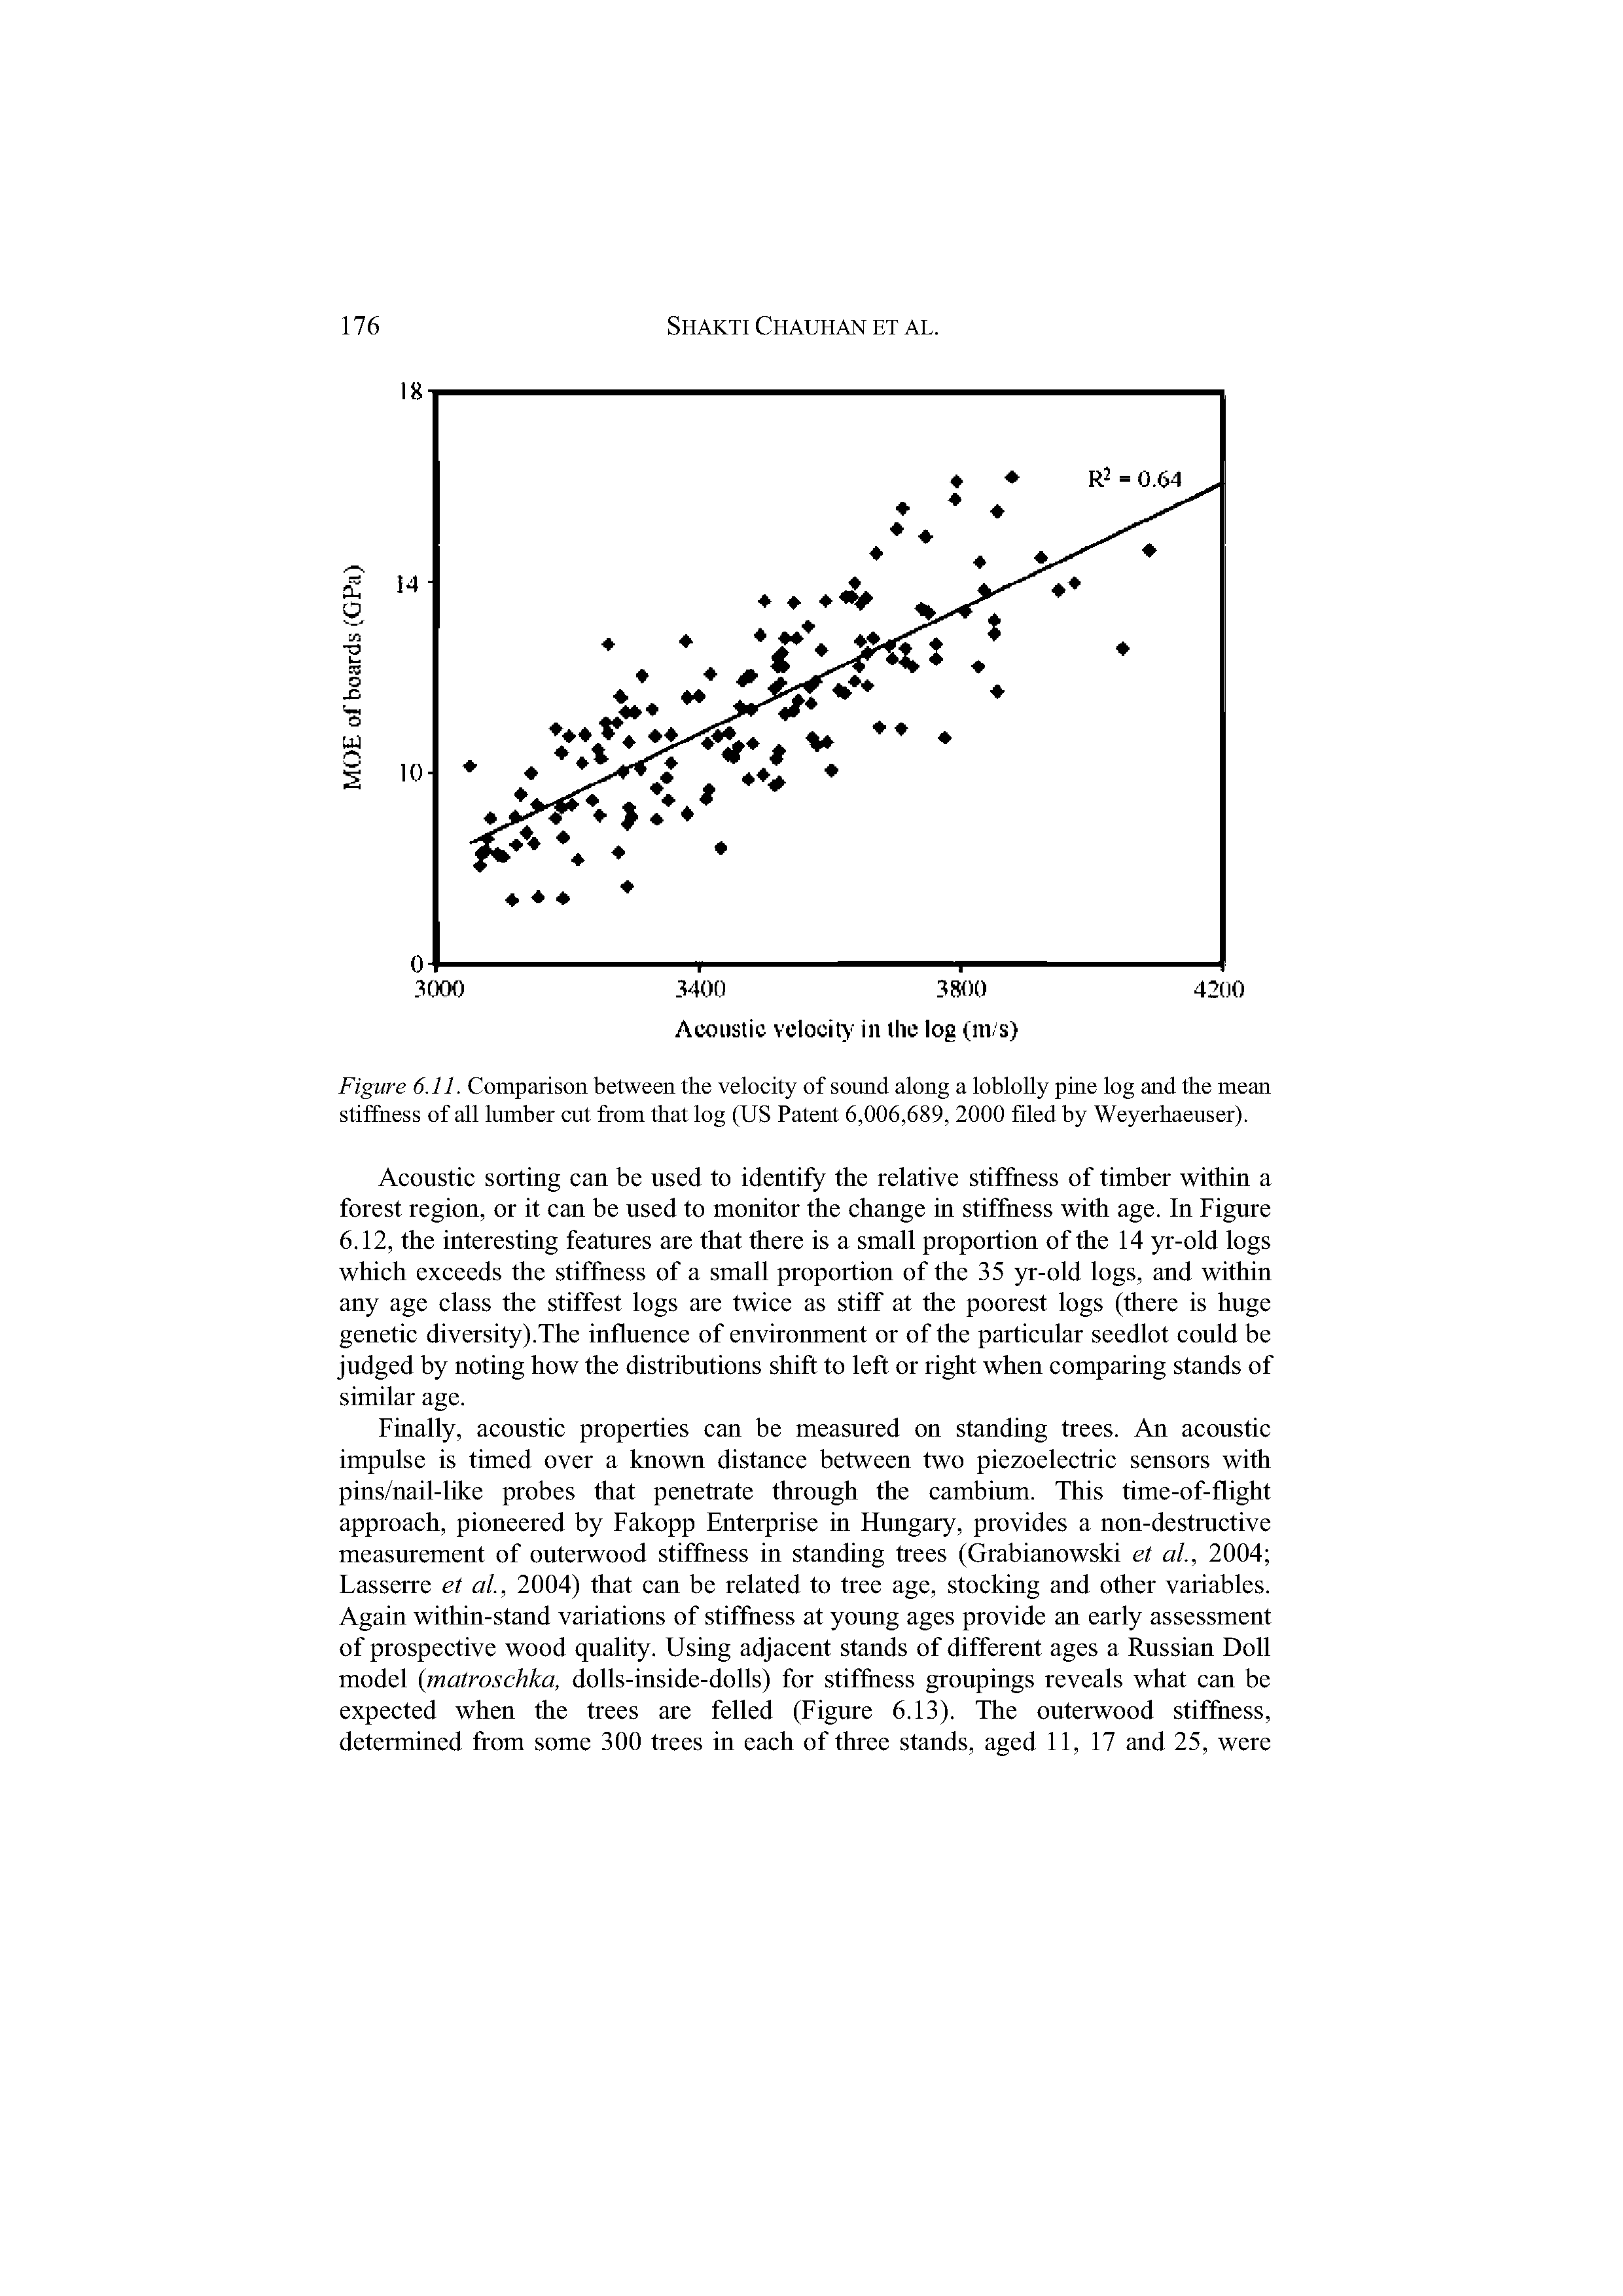 Figure 6.11. Comparison between the velocity of sound along a loblolly pine log and the mean stiffness of all lumber cut from that log (US Patent 6,006,689, 2000 filed by Weyerhaeuser).